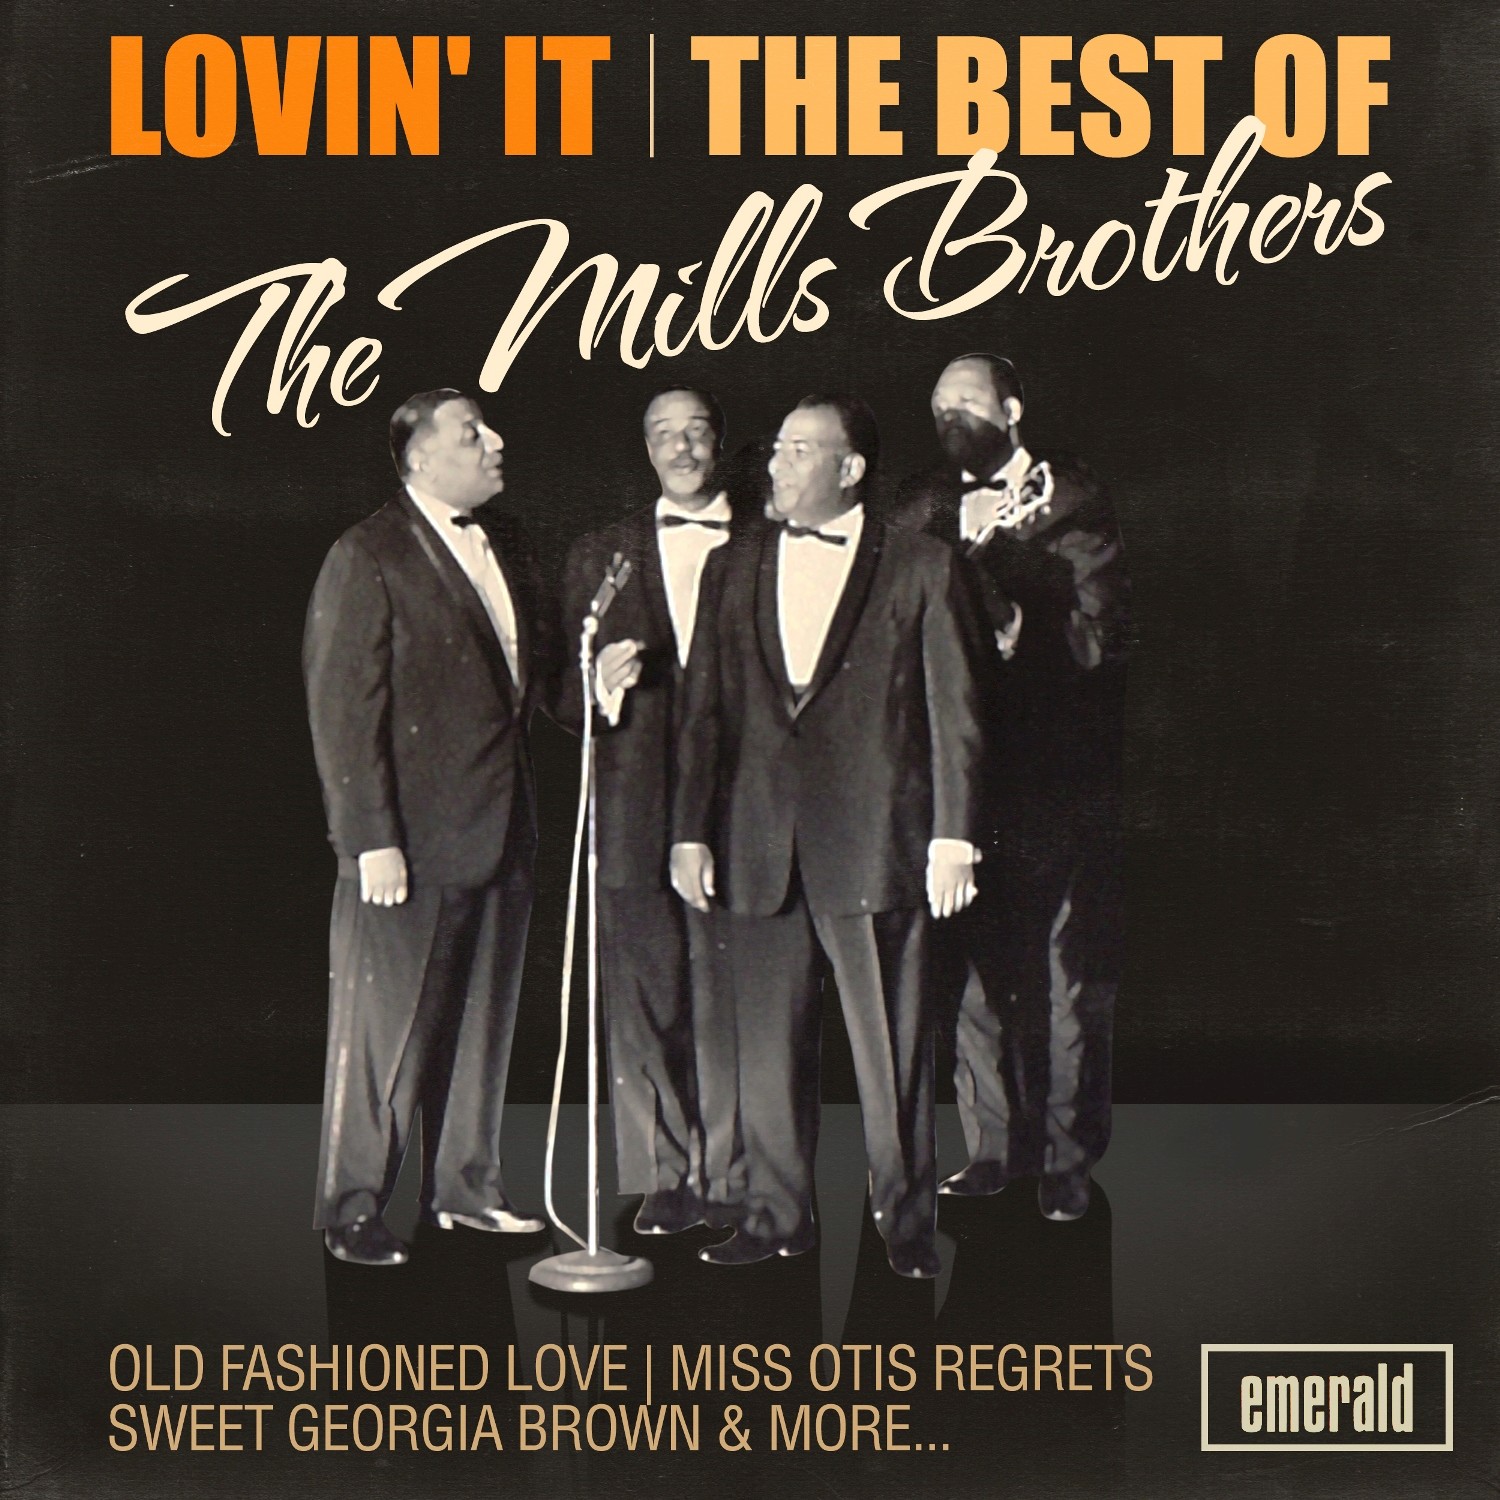 Lovin' It - The Best of the Mills Brothers